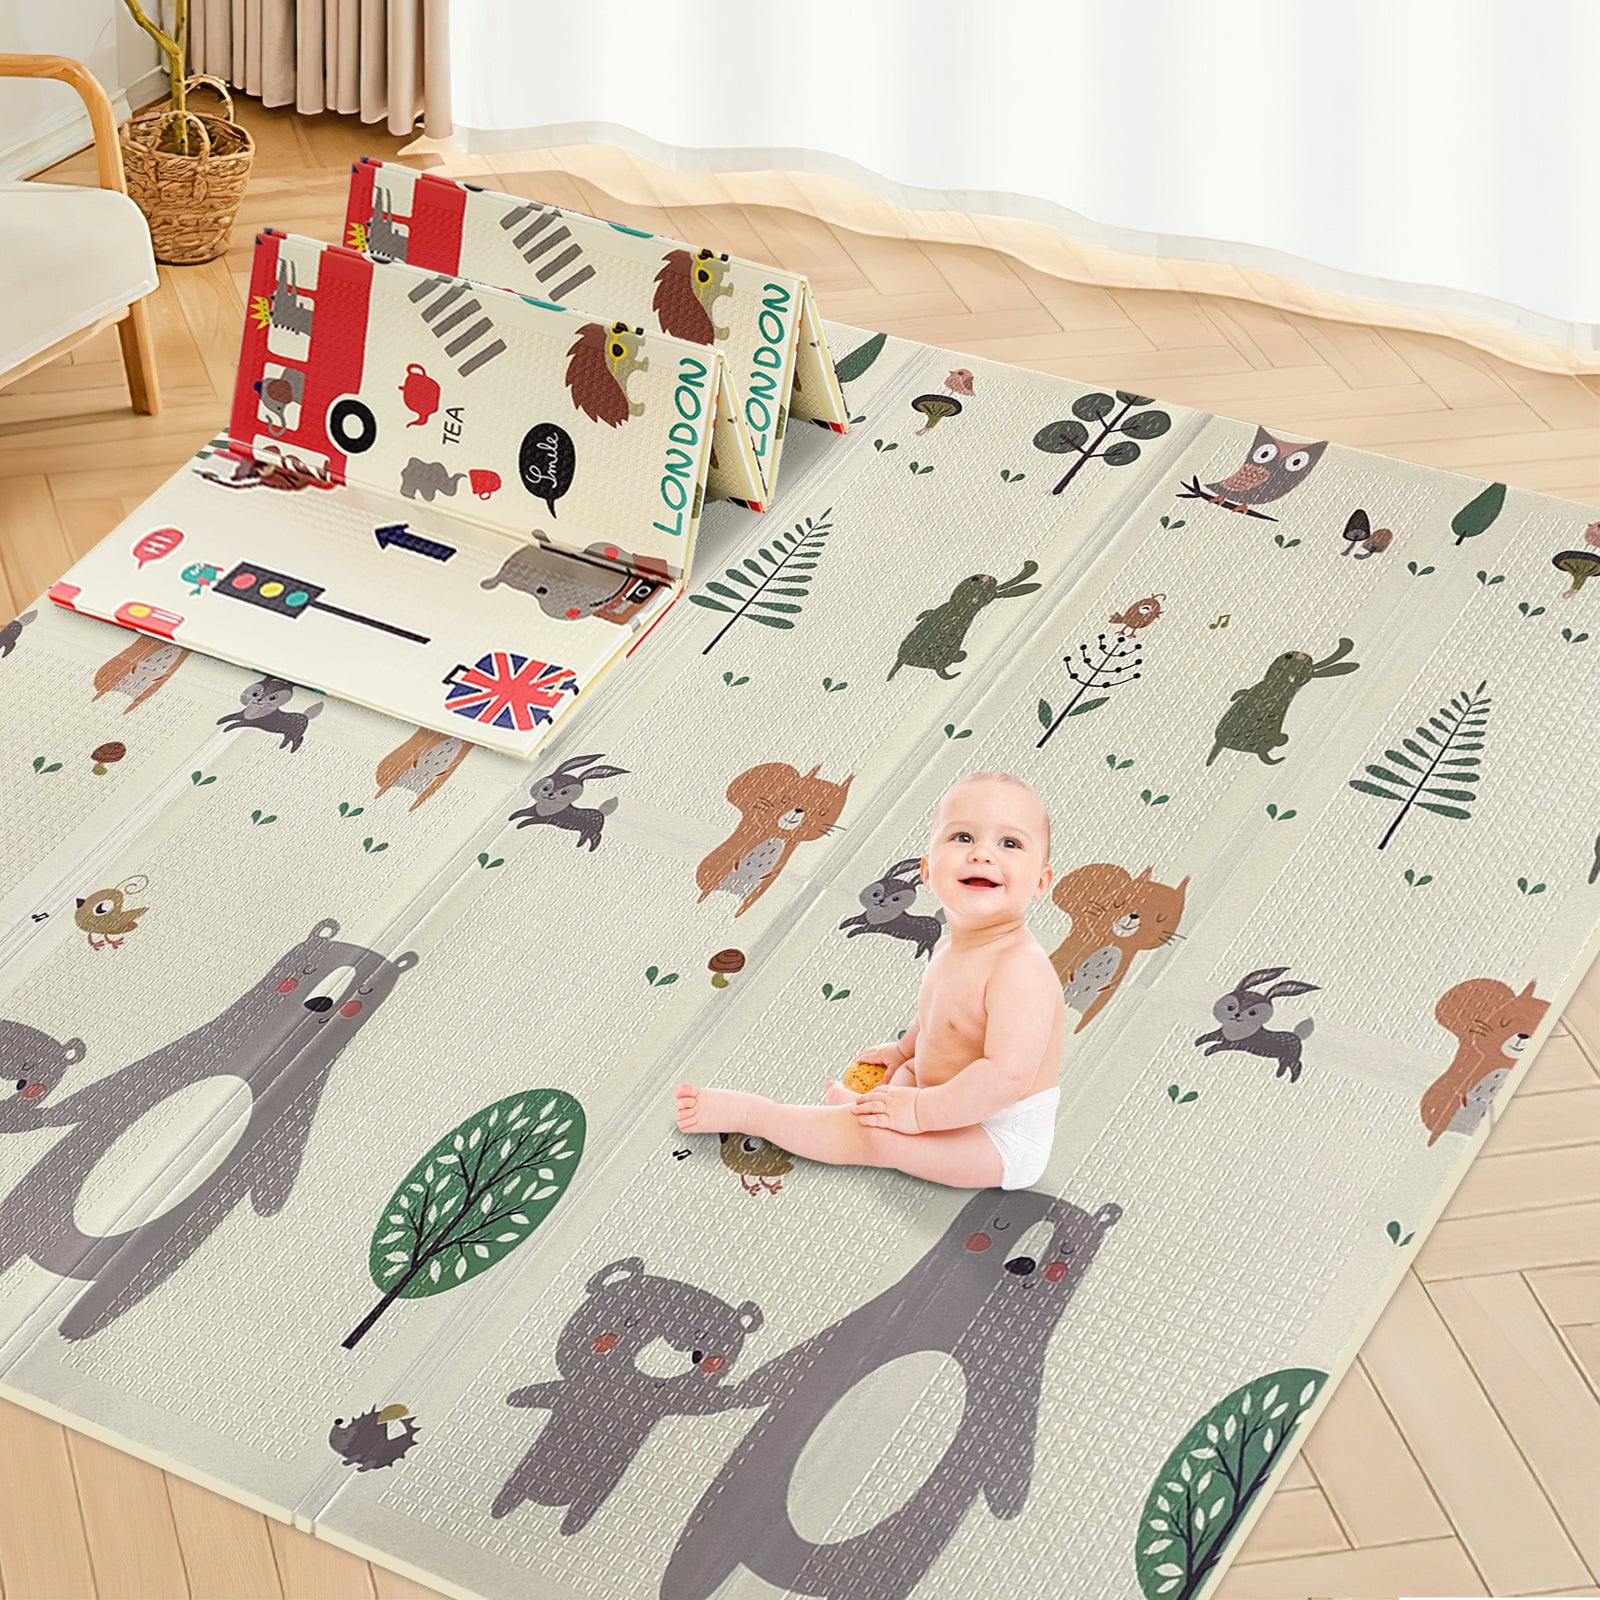 Bear Trip-T Extra Large Foldable Crawling Play Mat, Waterproof Easy to  Clean Playmat, Non-Toxic BPA Free Portable Folding Play Mats with Carry  Bag